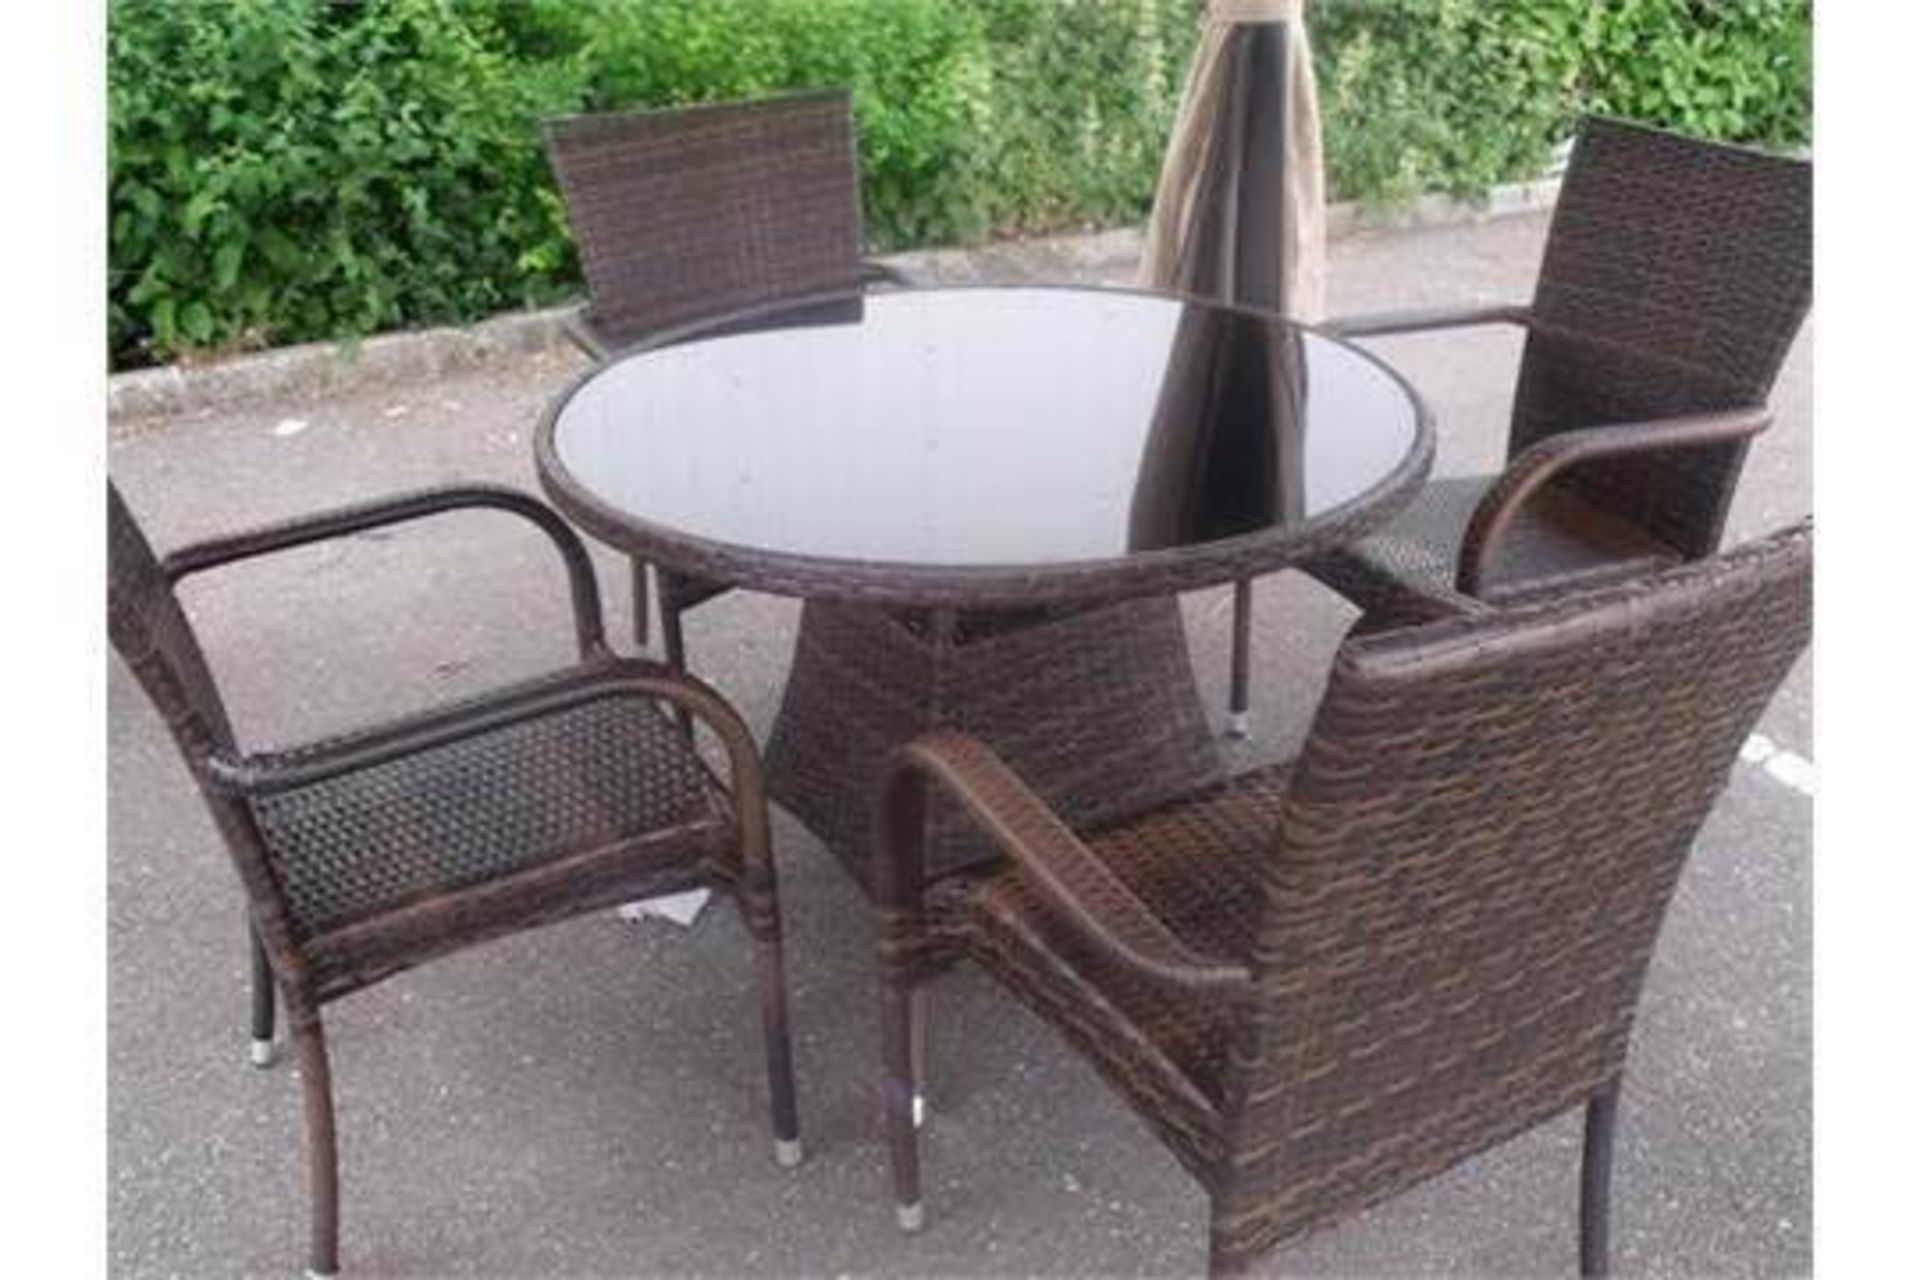 5 Piece Zebrano 5 Piece All Weather Dining / Patio Set. Multi Brown All Weather Rattan. 4 x Stacking